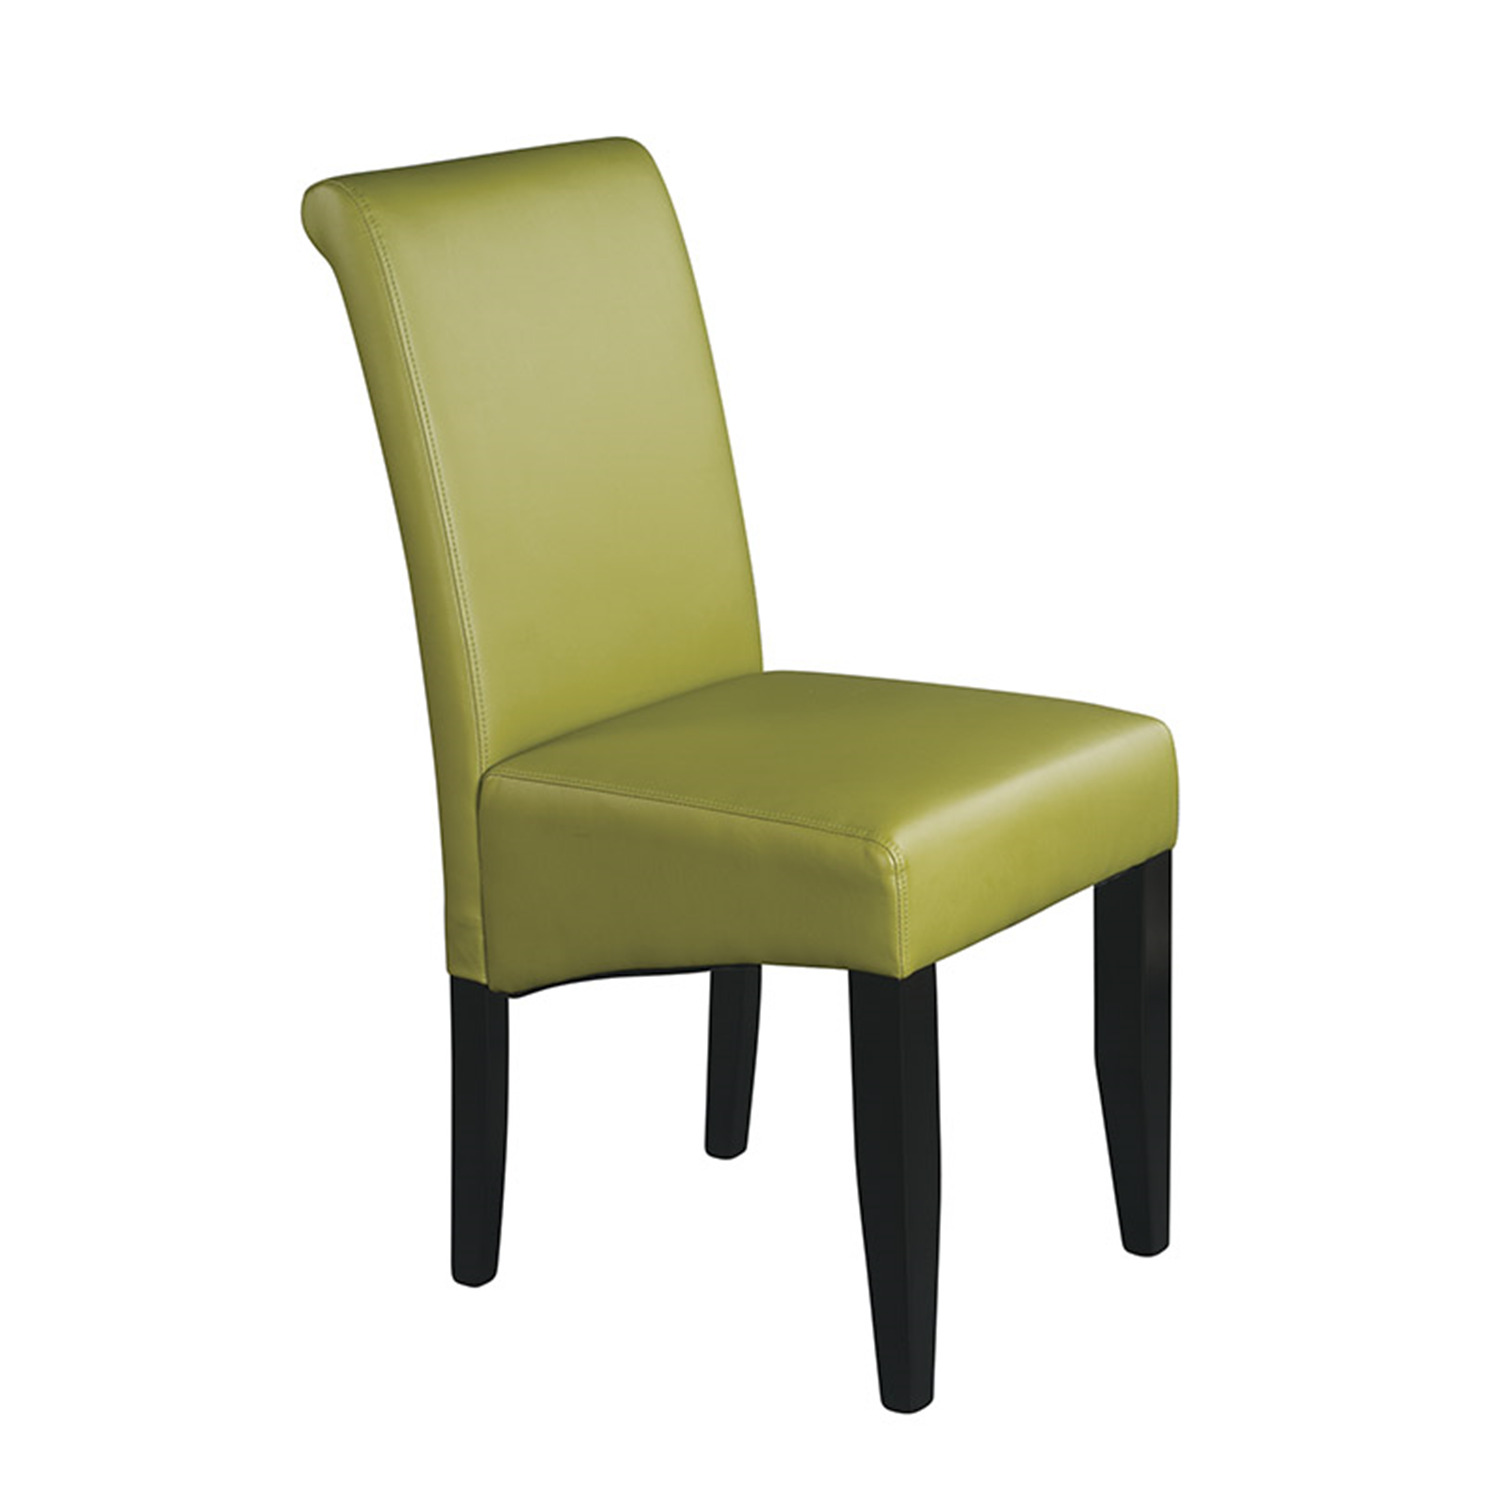 Metro Parsons Dining Chair-Color:Kiwi Green - image 1 of 2